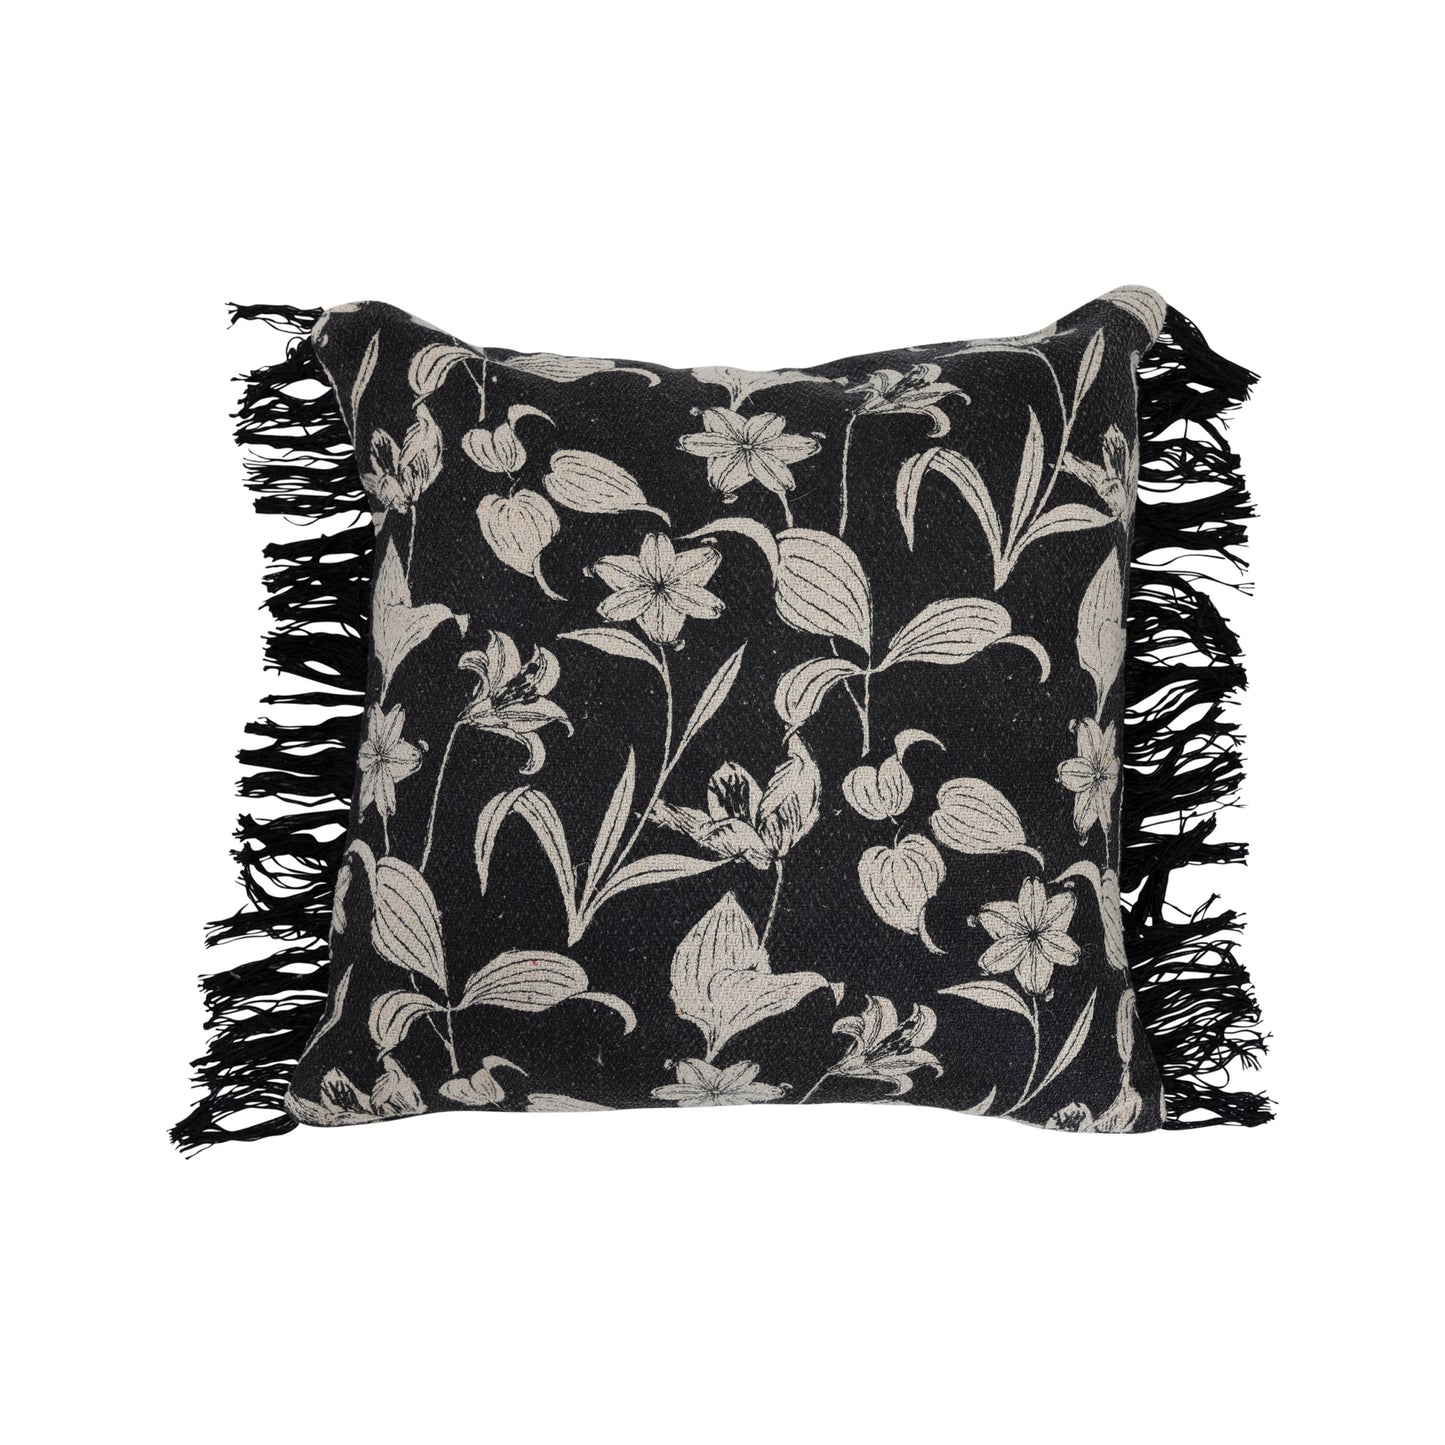 Recycled Cotton Printed Pillow with Floral Pattern and Fringe